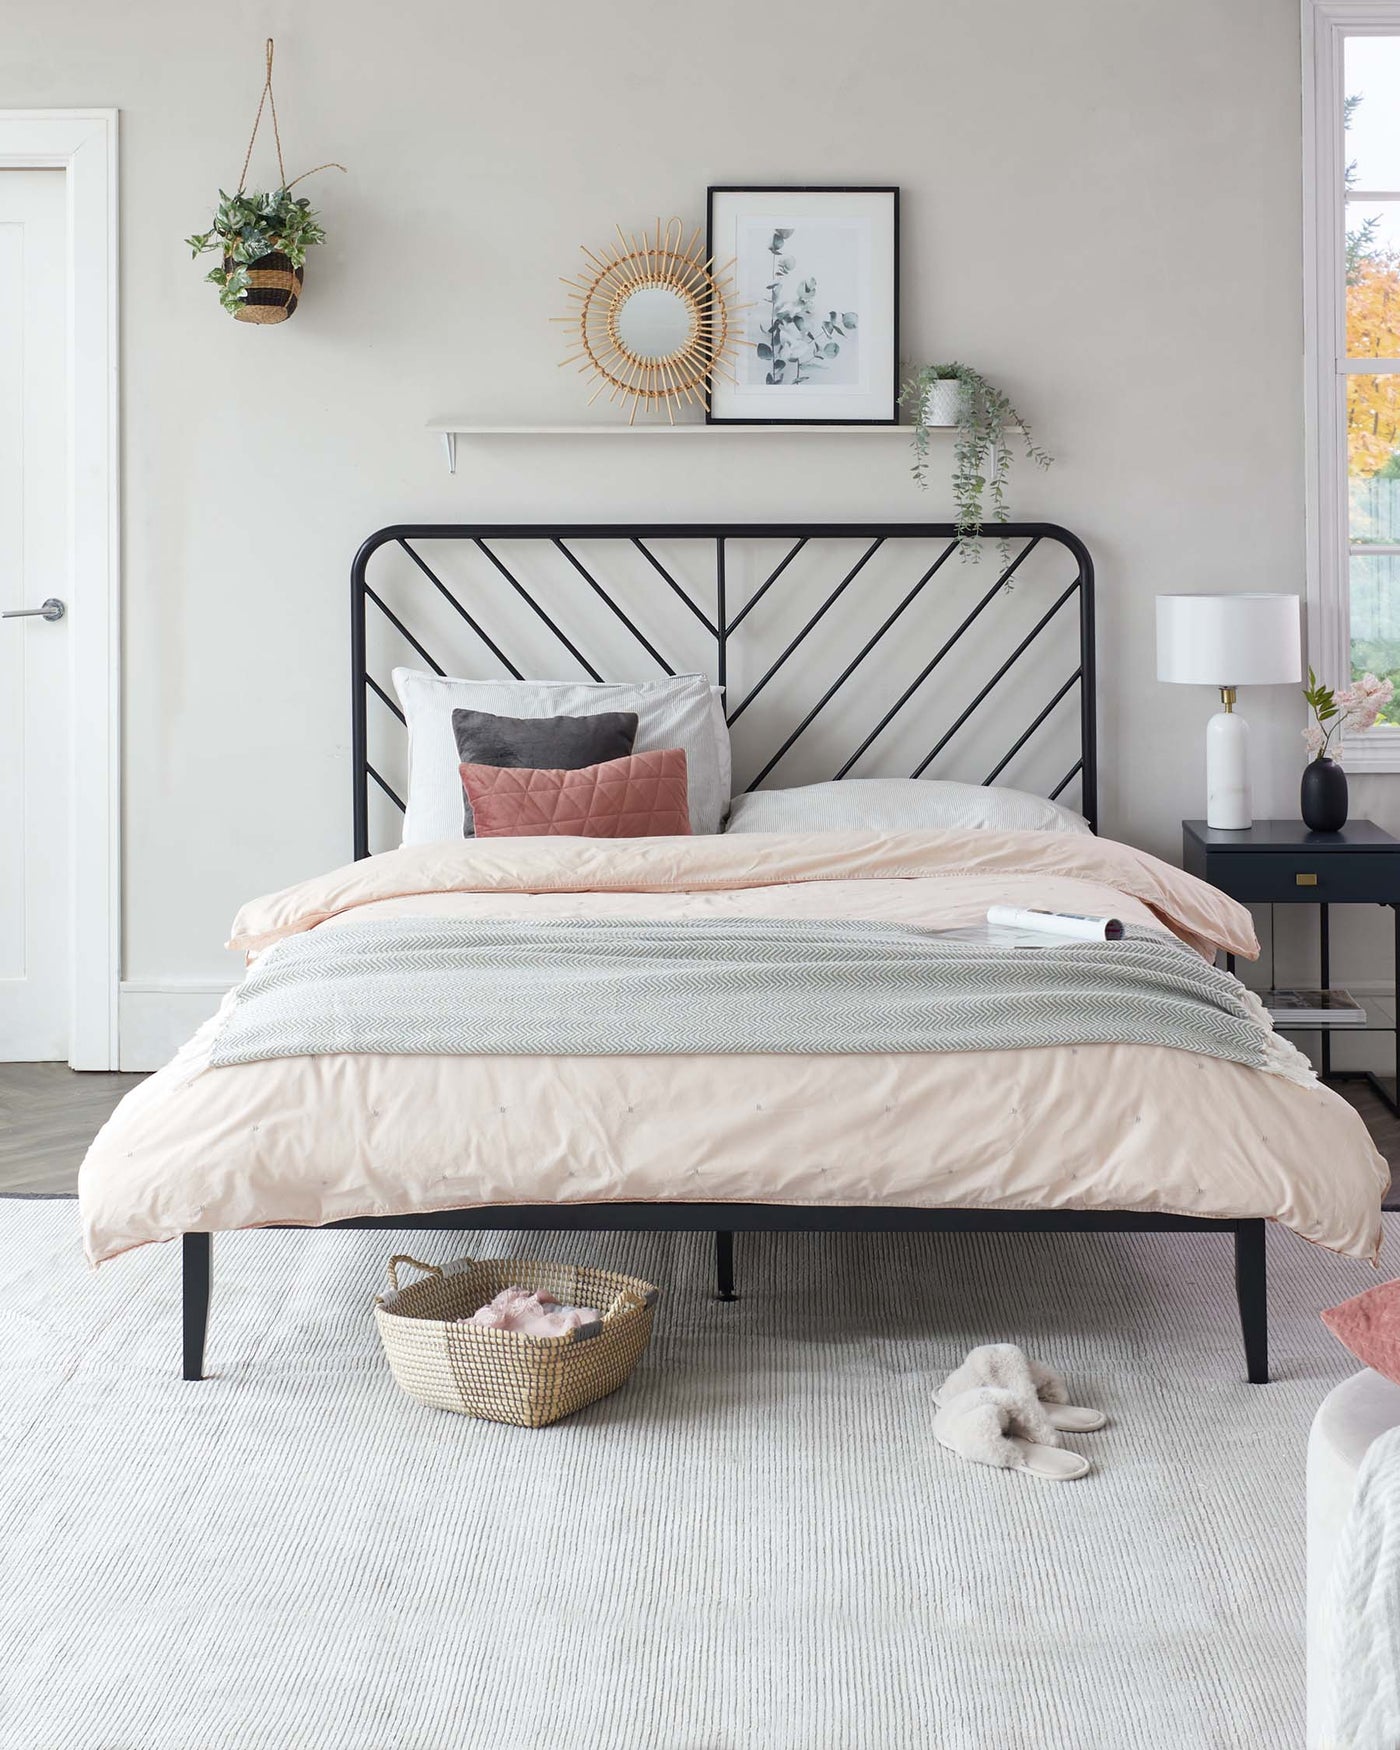 Black metal bed frame with a minimalist design including straight lines and angled patterns on the headboard, complemented by a light-coloured textured area rug and a simple black side table with a drawer.